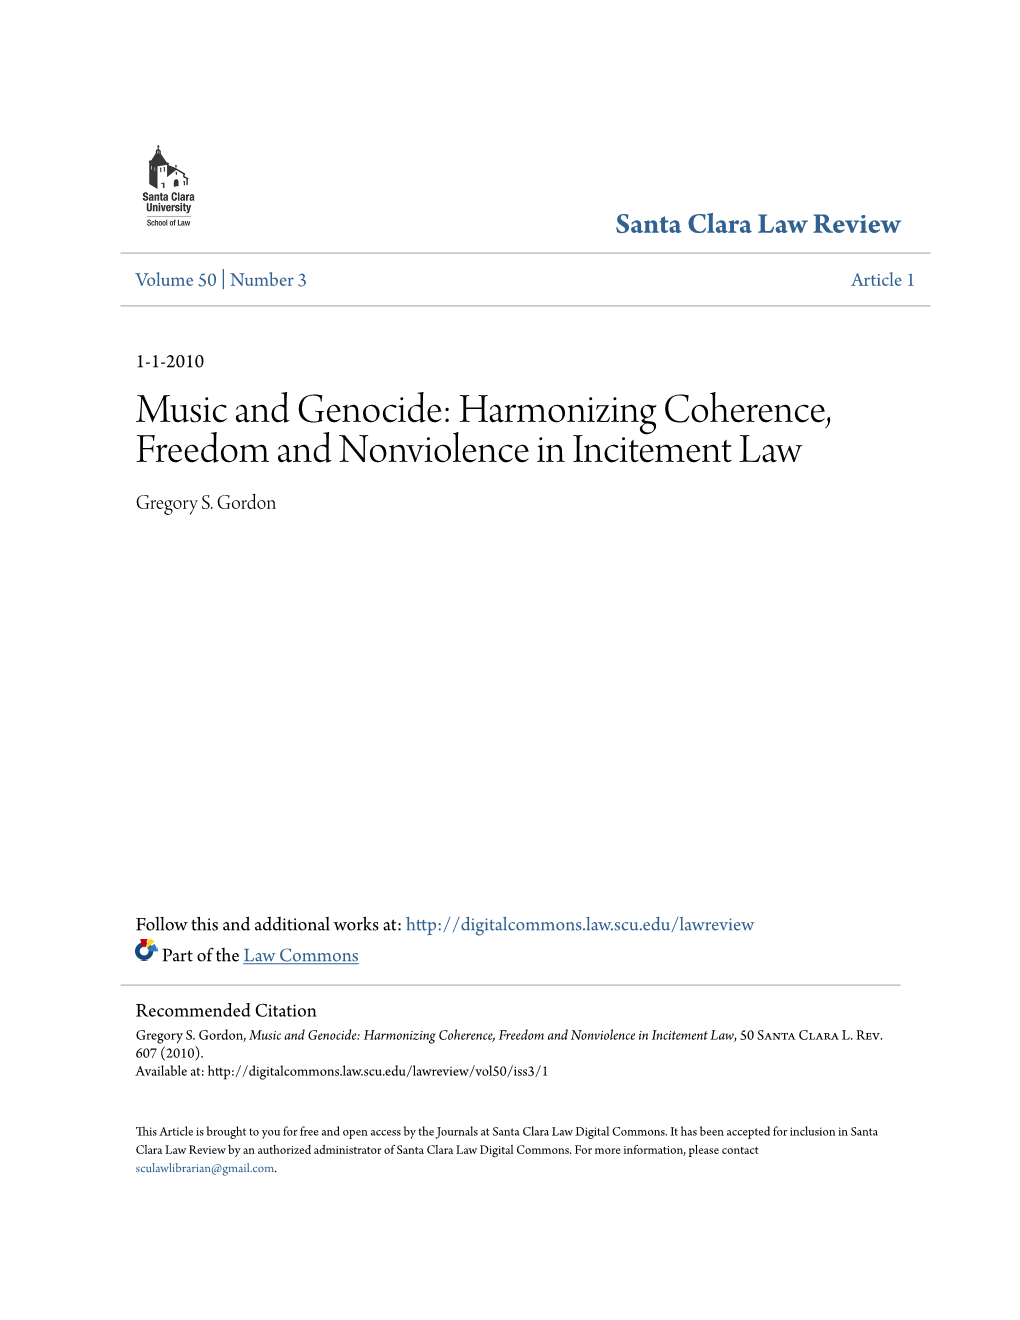 Music and Genocide: Harmonizing Coherence, Freedom and Nonviolence in Incitement Law Gregory S